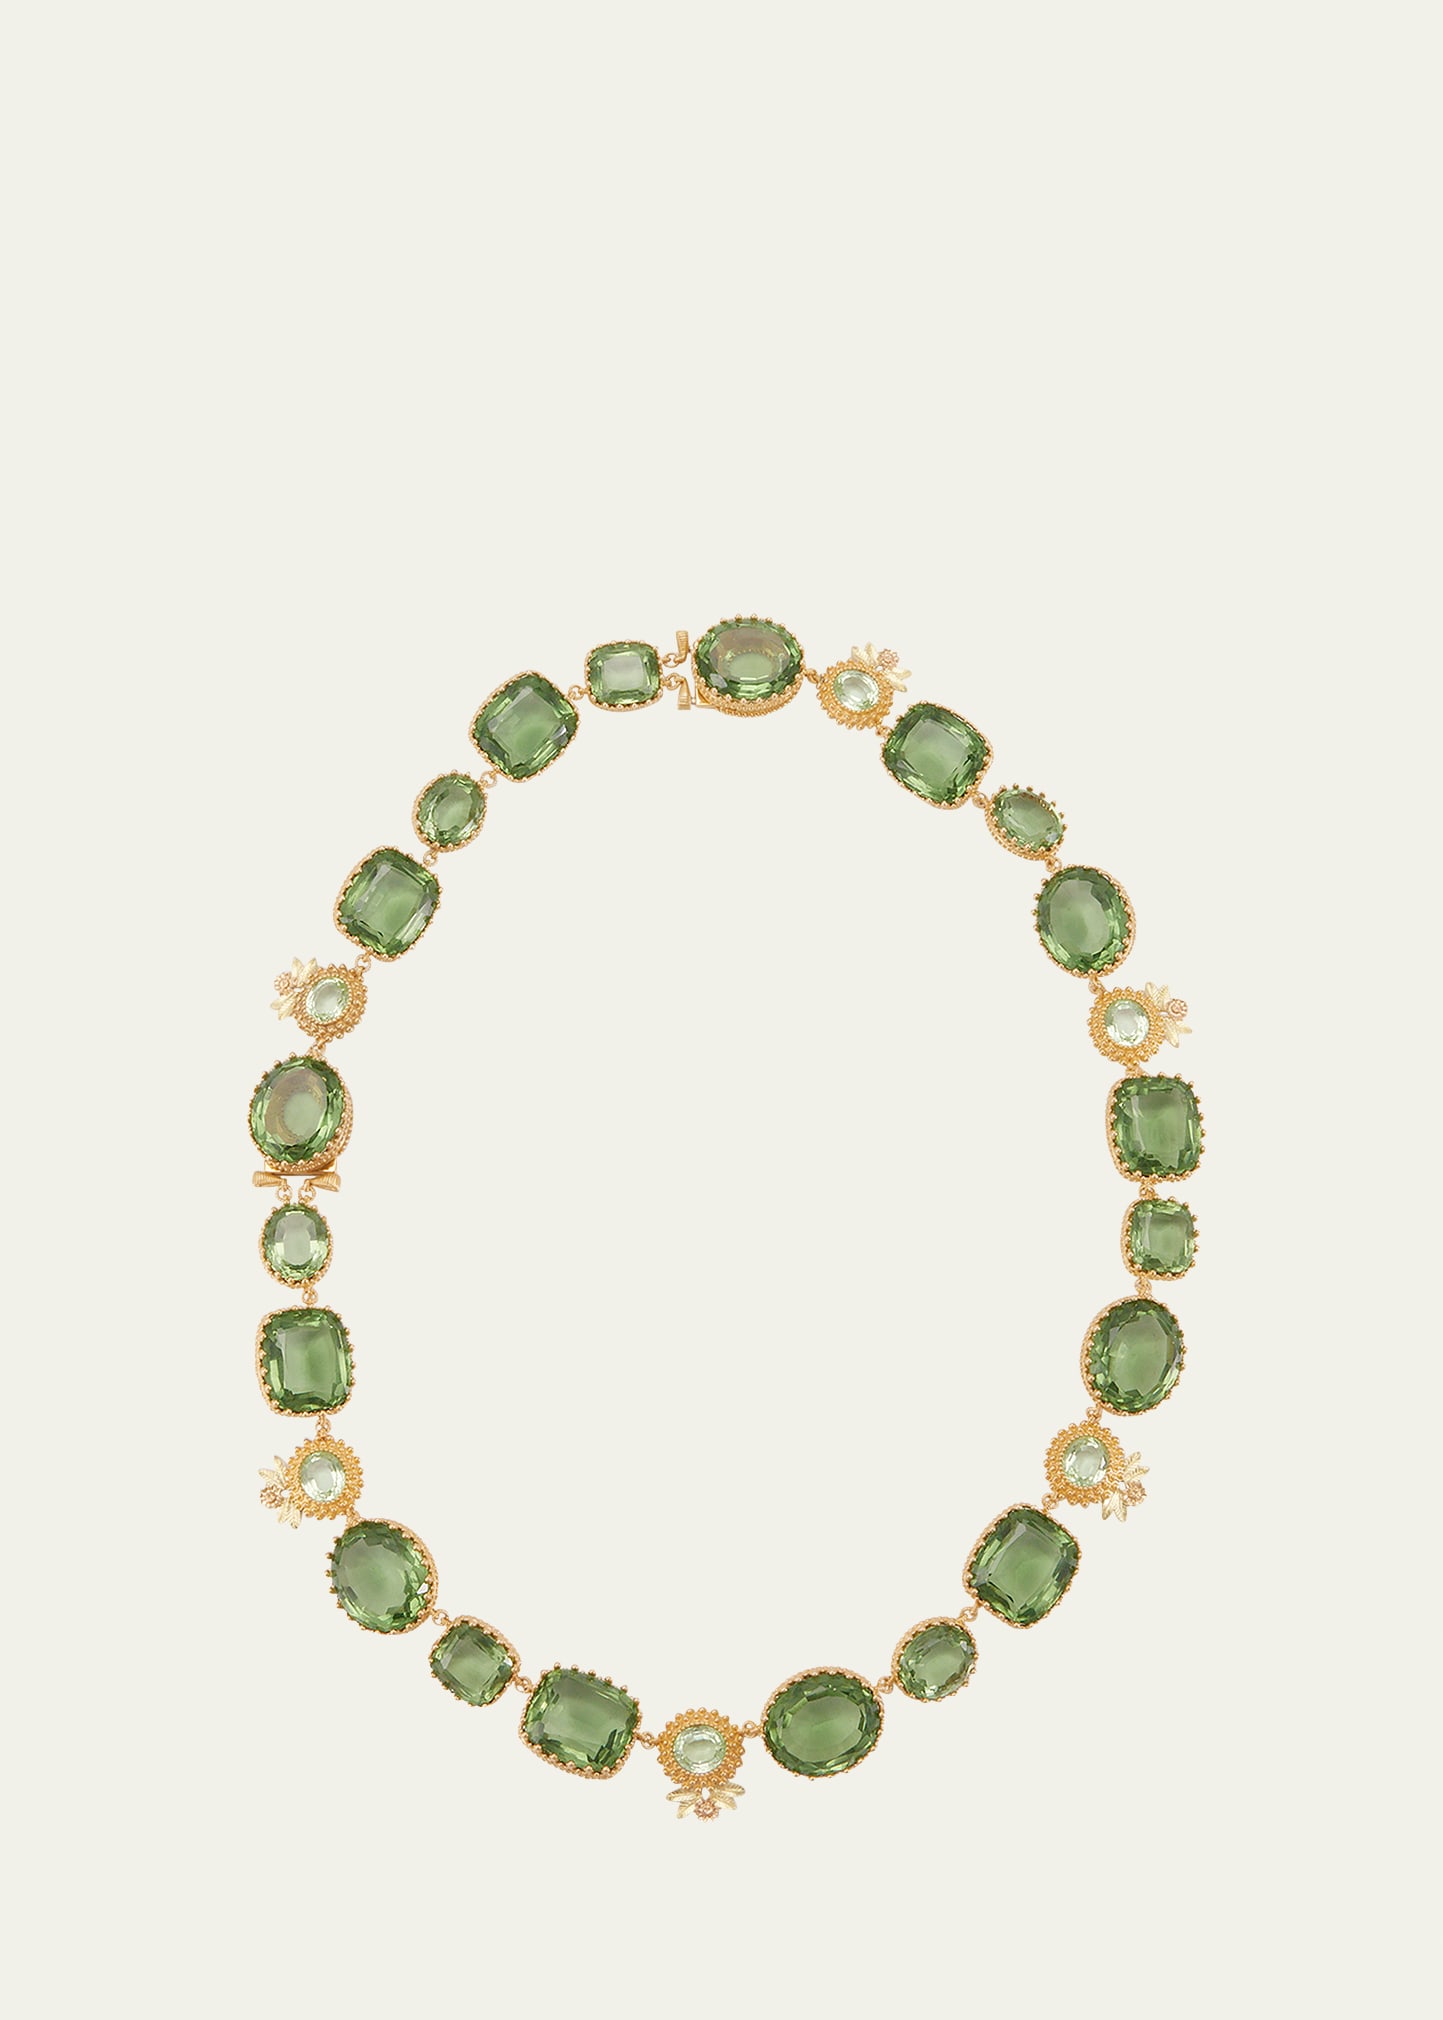 18K Yellow and Pink Gold Pierreries Necklace with Floral Pattern and Prasiolite